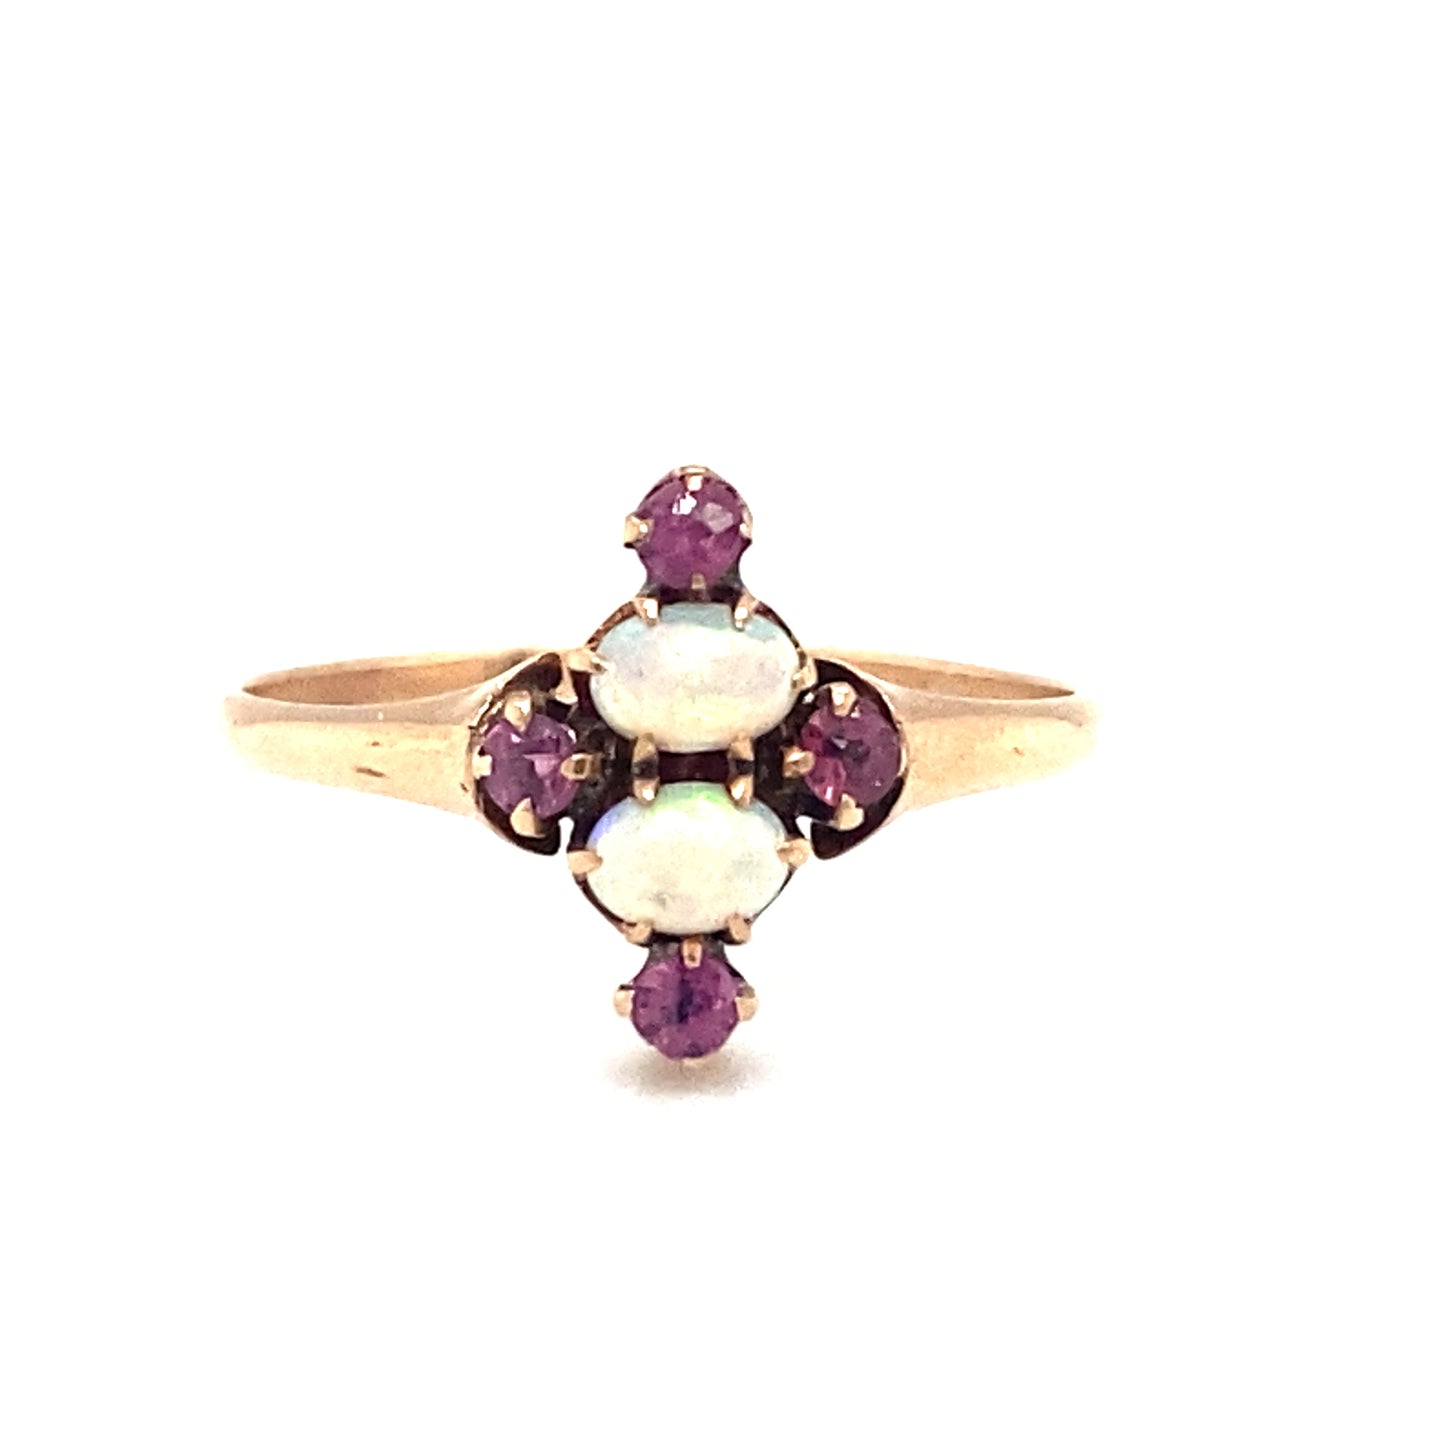 Circa 1890s Pink Sapphire and Ethiopian Opal Ring in 9K Gold